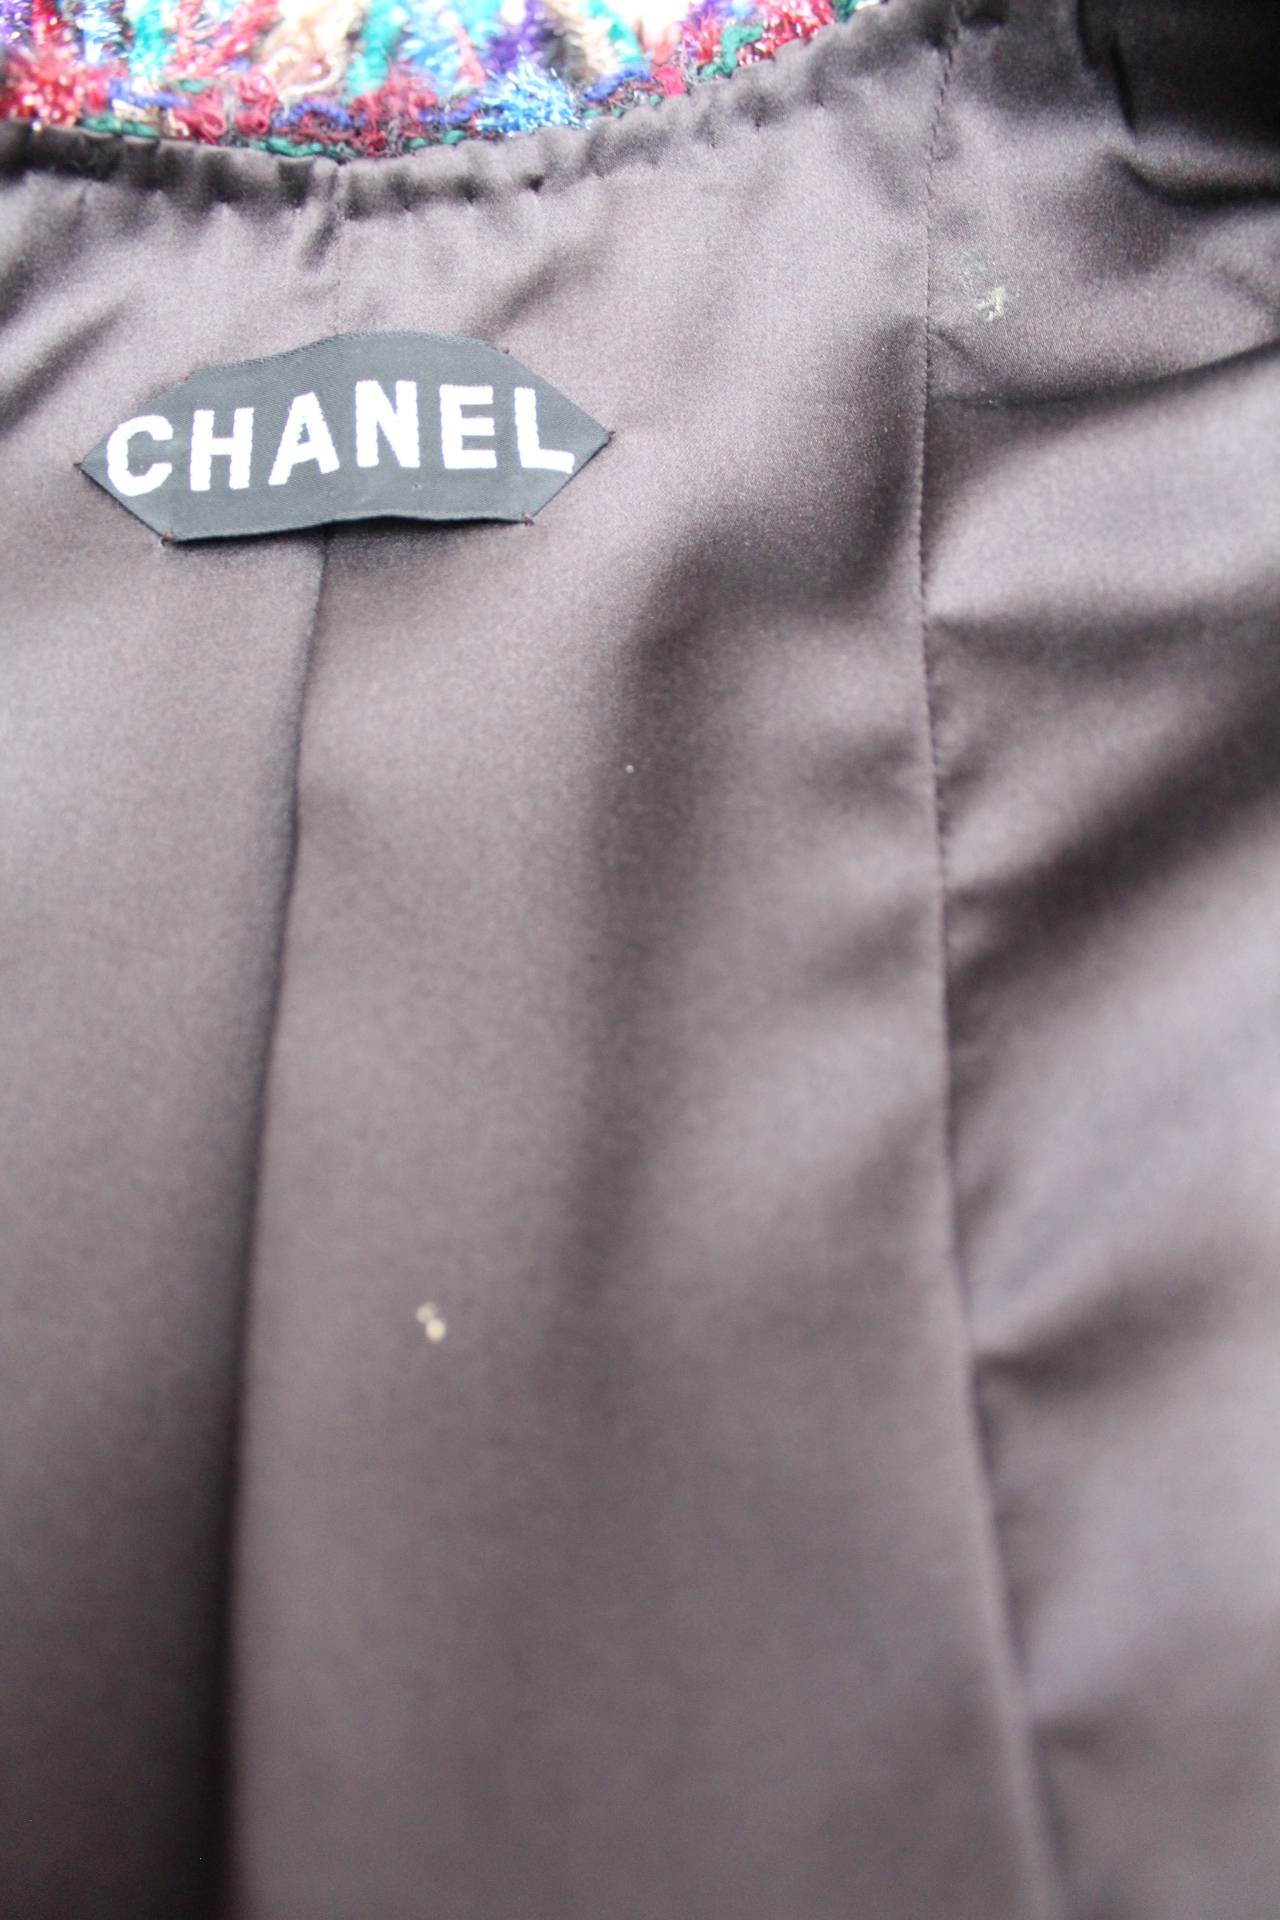 Tweed Haute Couture Chanel Jacket, circa 1990s 5